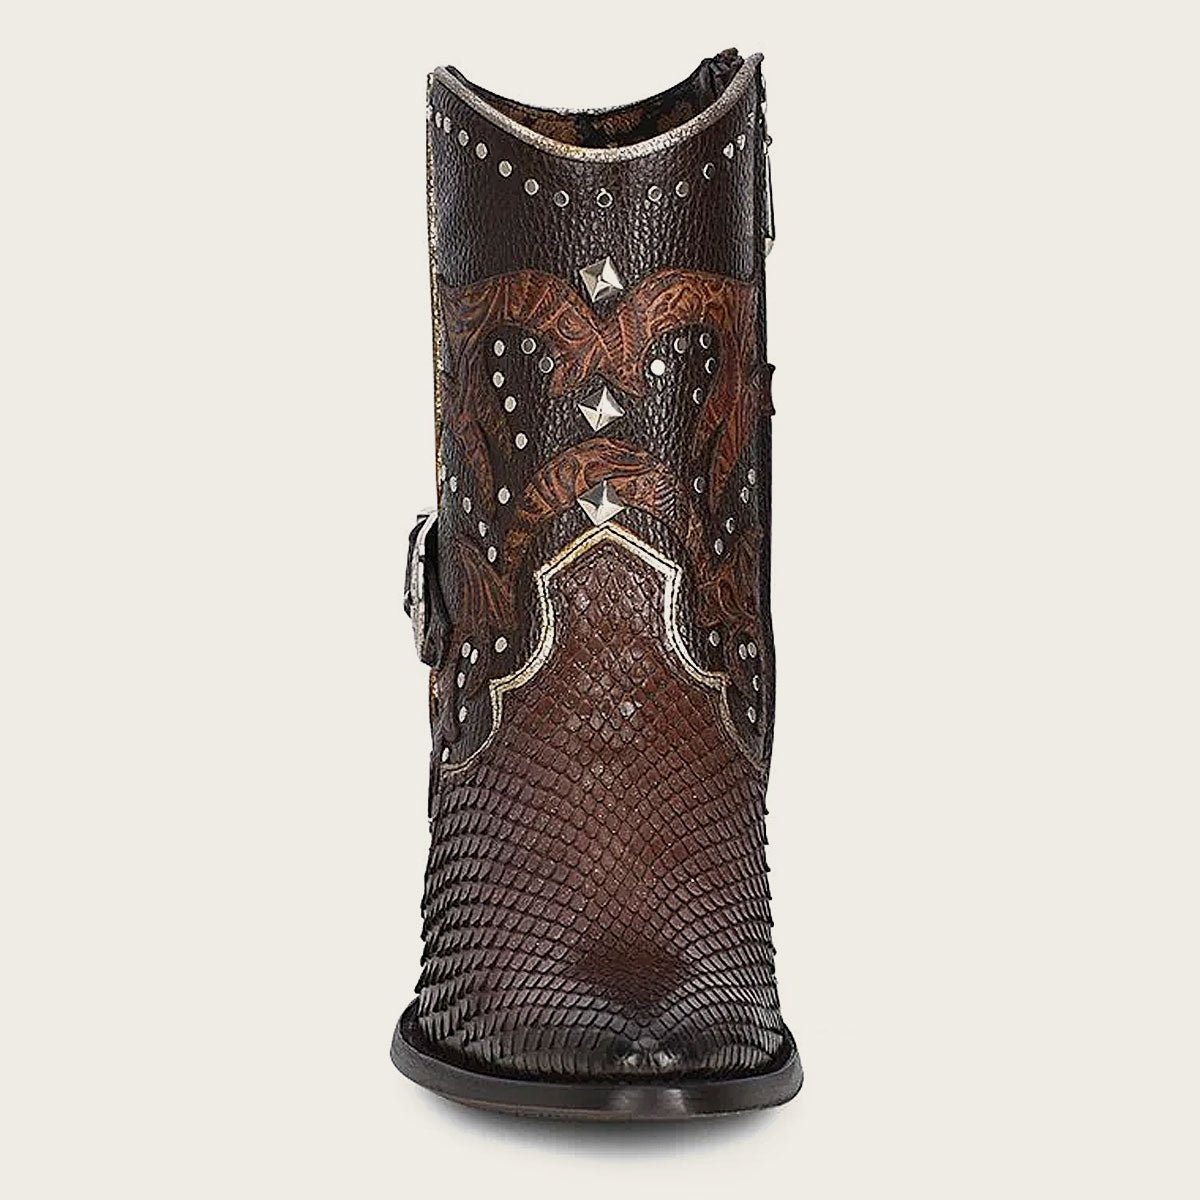 Brown western exotic leather bootie - elevate your Western style with these exquisite booties made from premium quality leather. Unique texture and pattern make them stand out, with classic design and modern detailing perfect for any occasion.